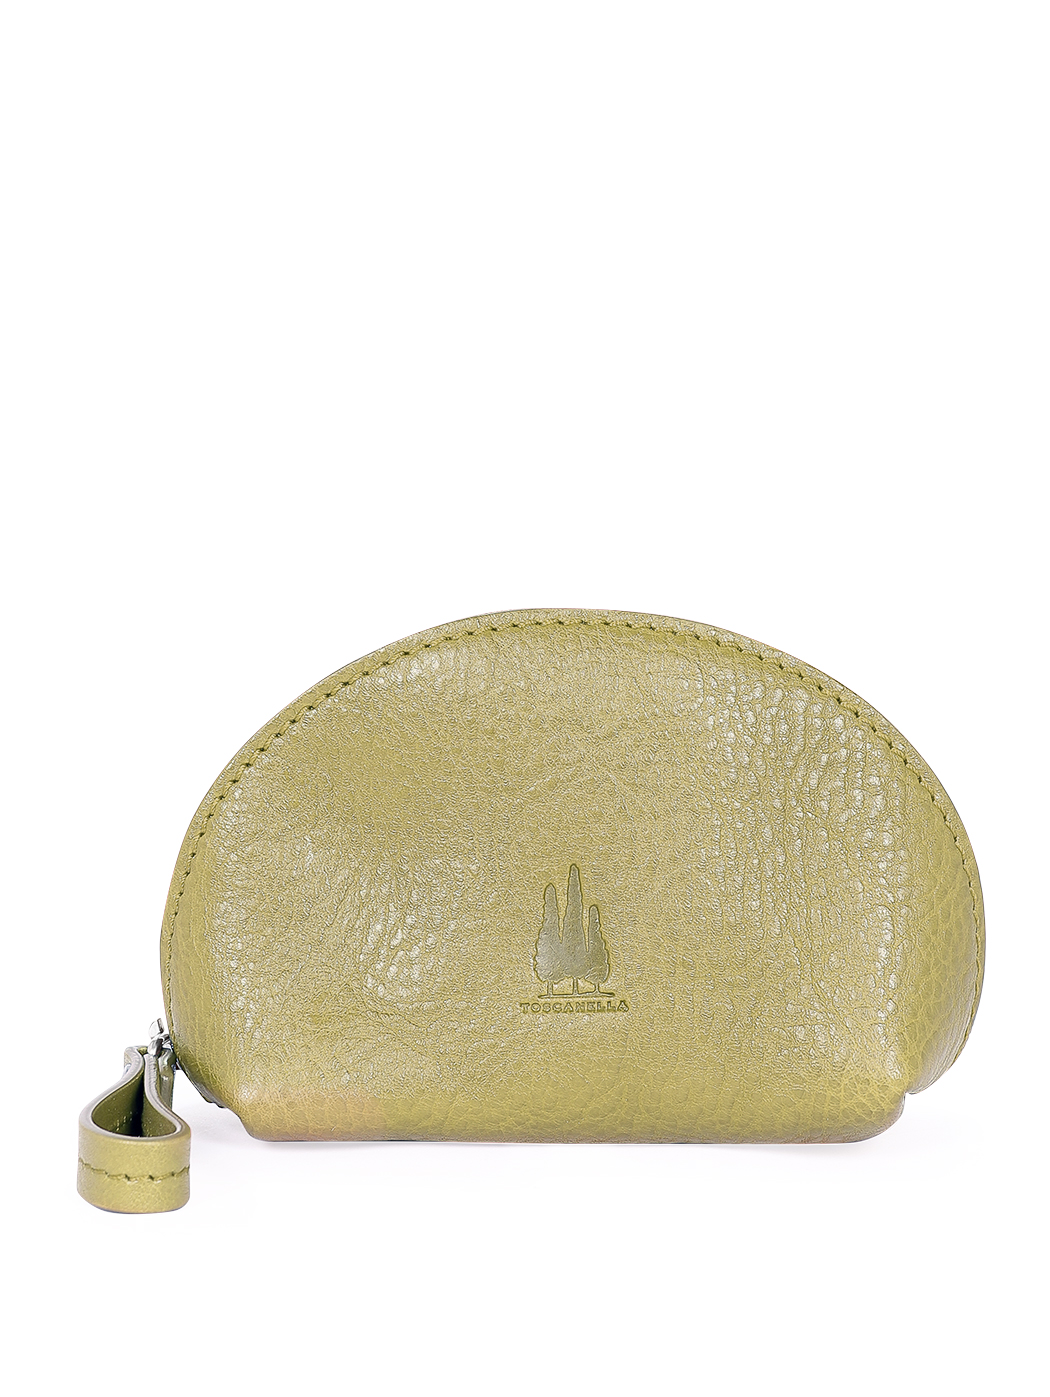 Women's Clamshell Hold-all Pouch in Leather Olive green